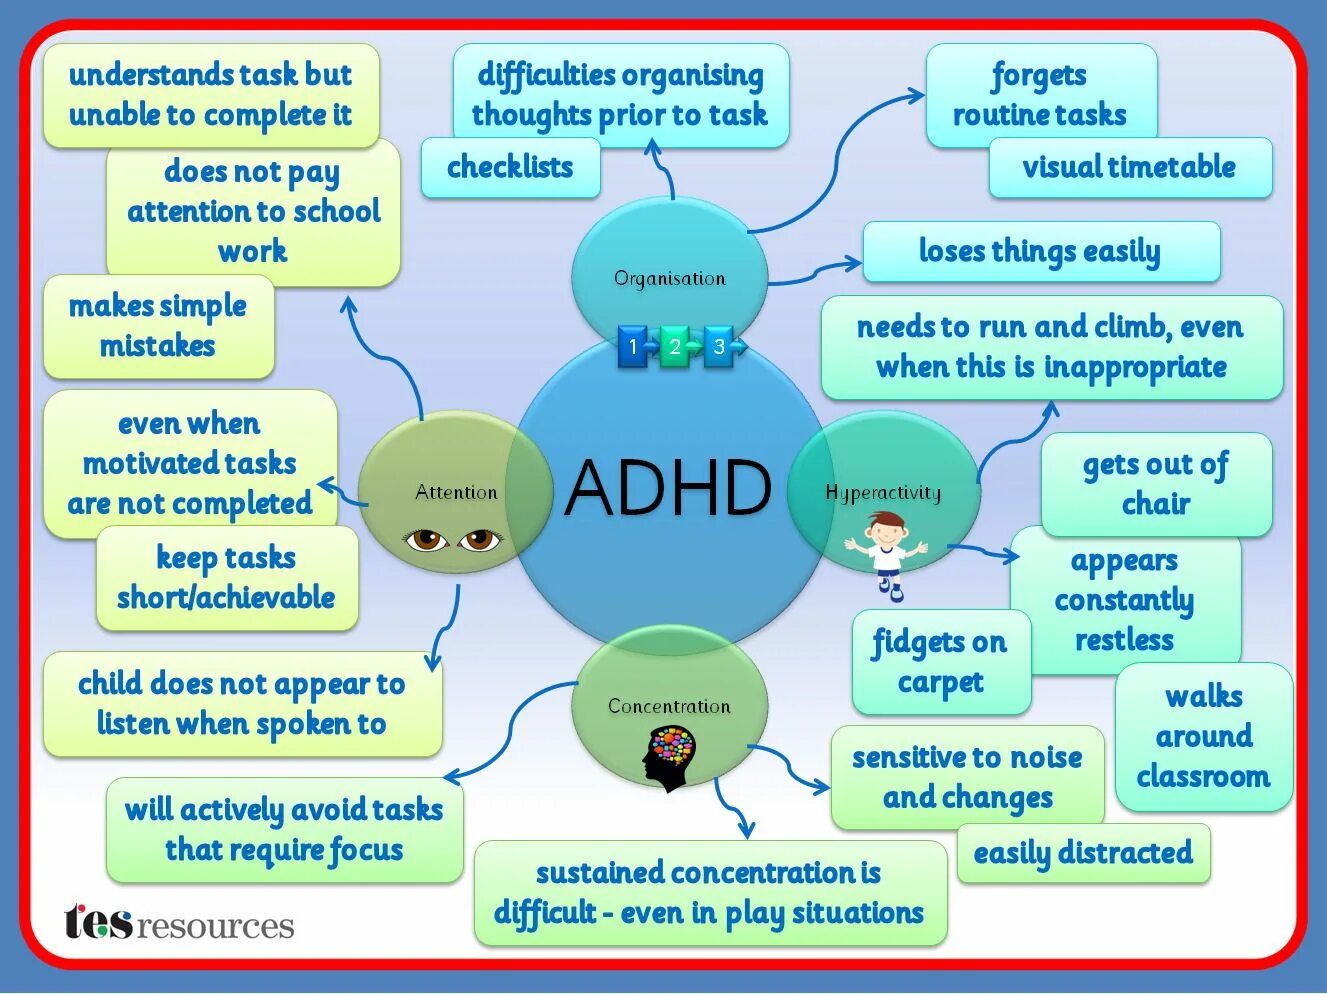 Attention-deficit/hyperactivity Disorder (ADHD). Add and ADHD. Визуал школьного проекта. Short attention. Complete attention